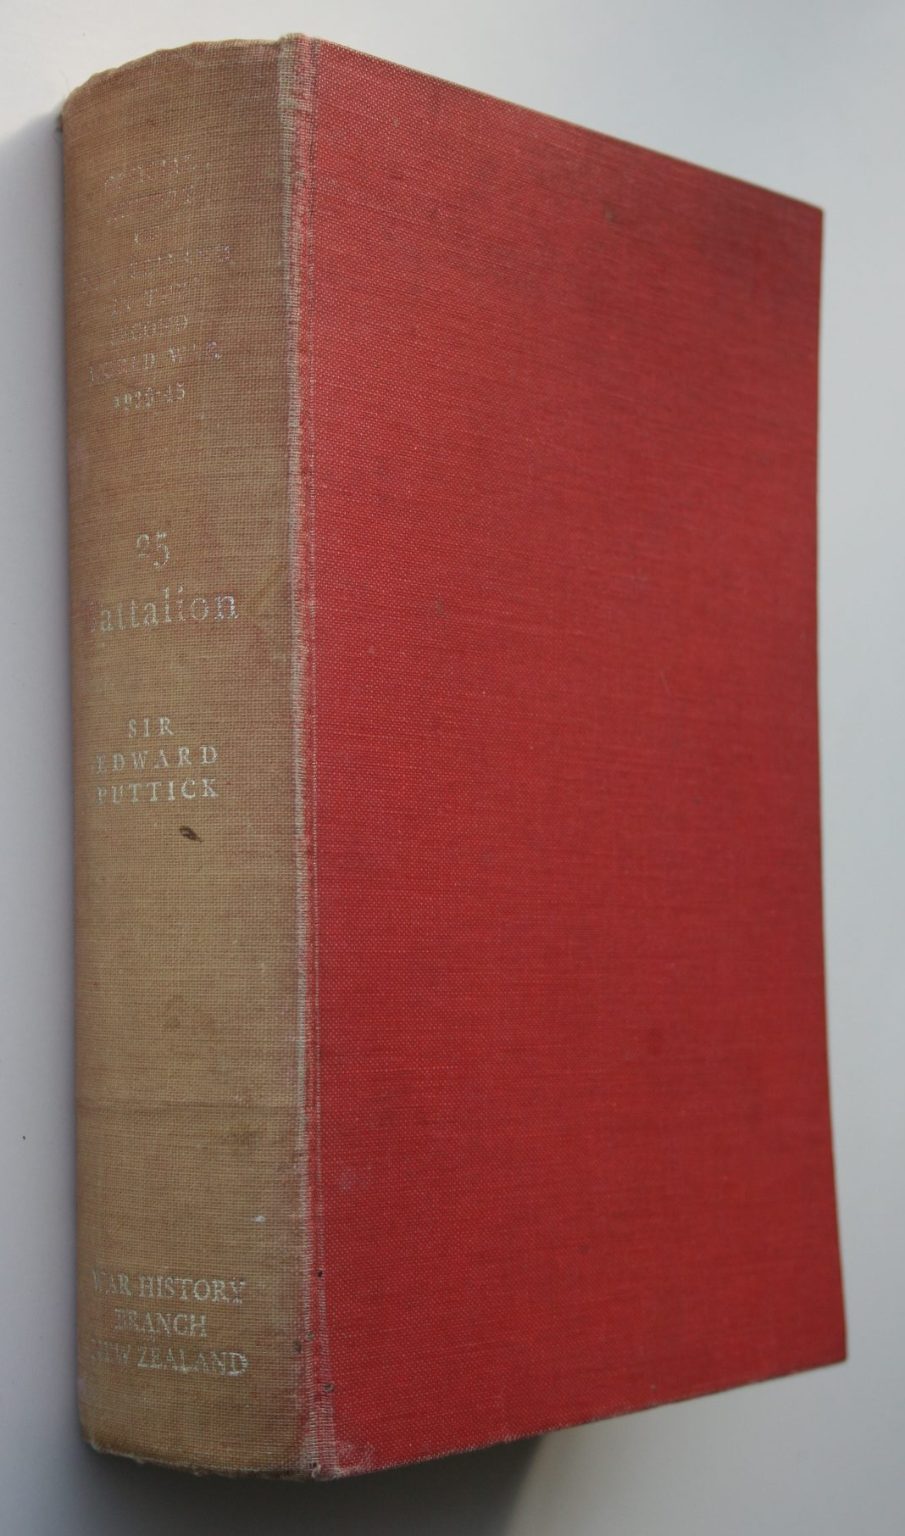 25 Battalion: Second New Zealand Expeditionary Force - by Sir Edward Puttick. [First Edition]